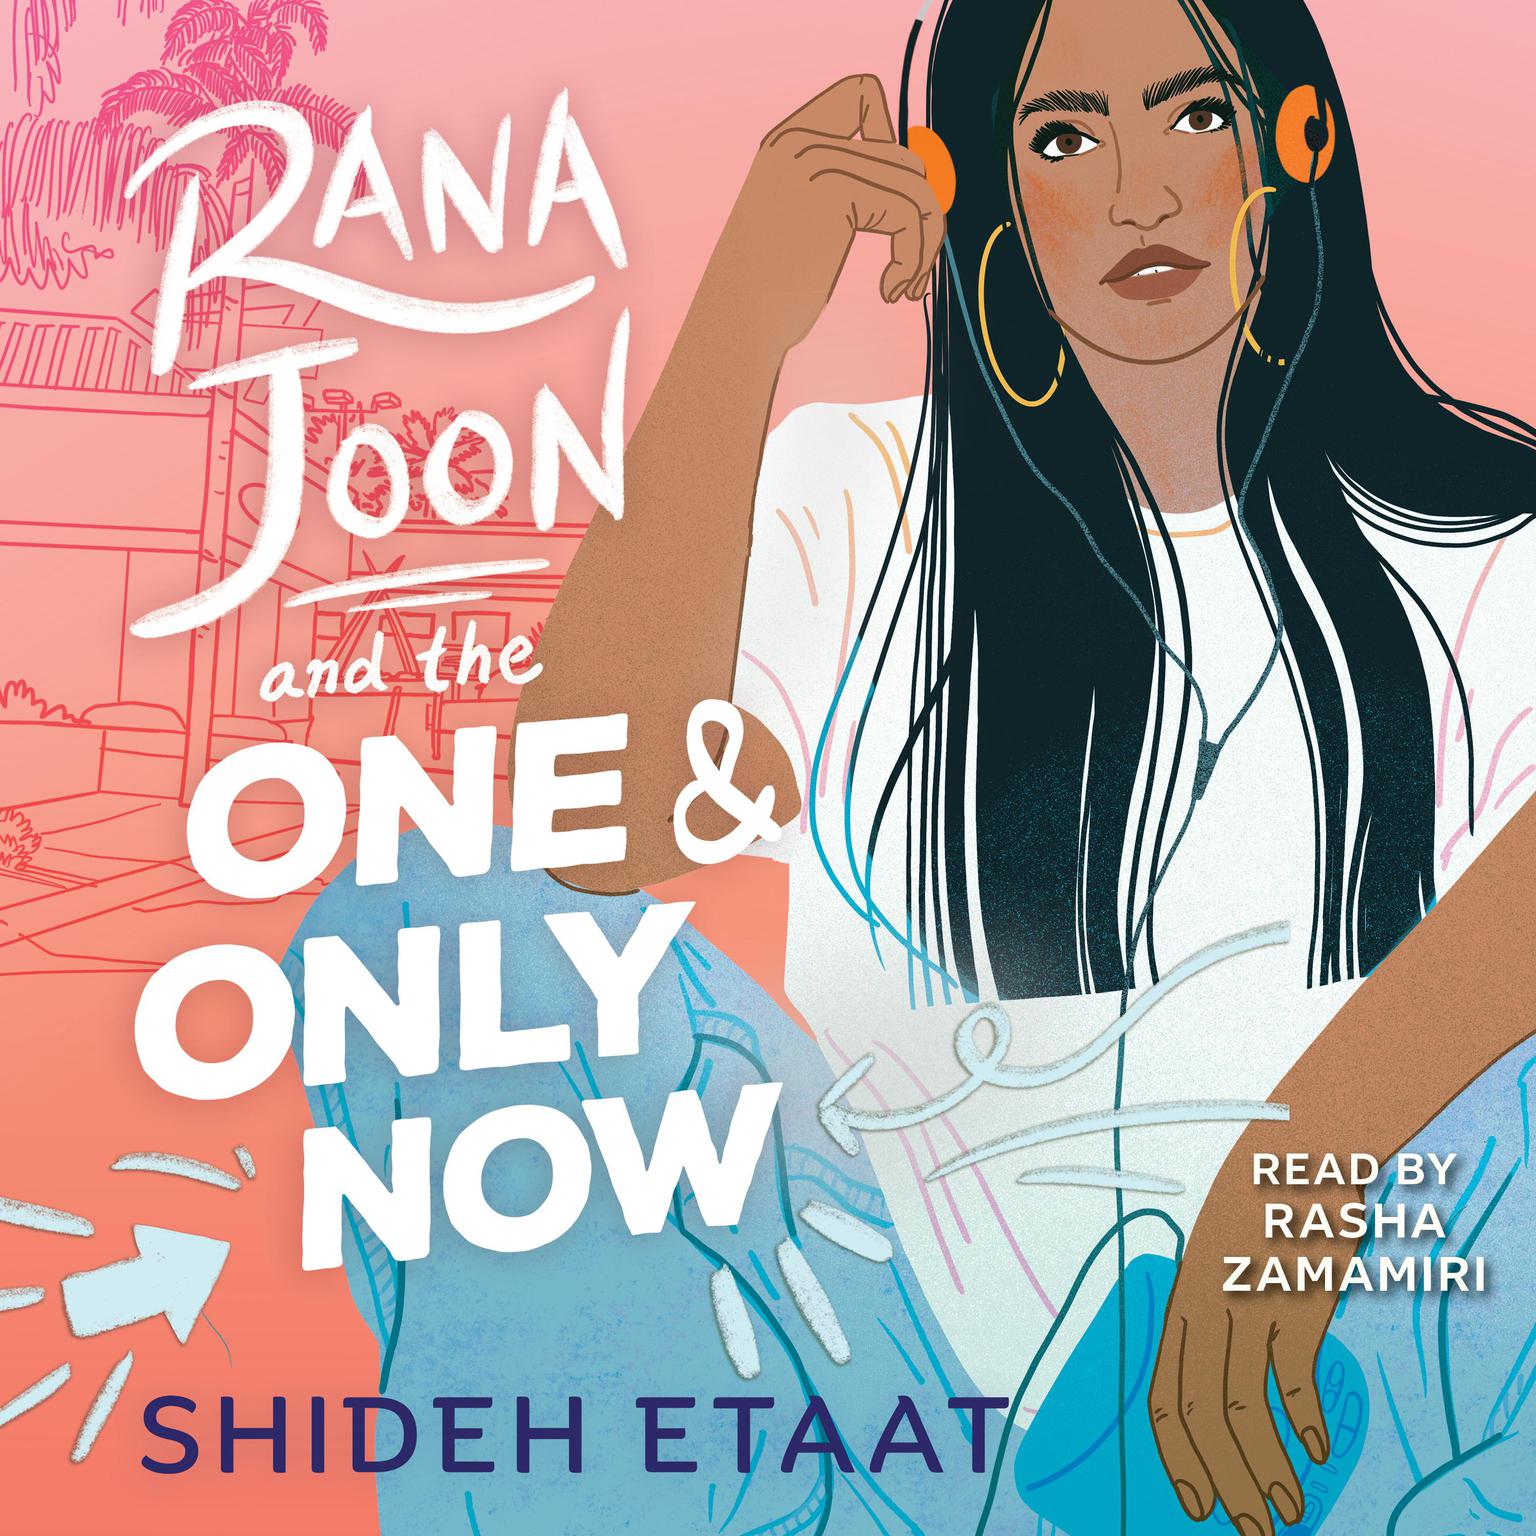 Rana Joon and the One and Only Now Audiobook, by Shideh Etaat